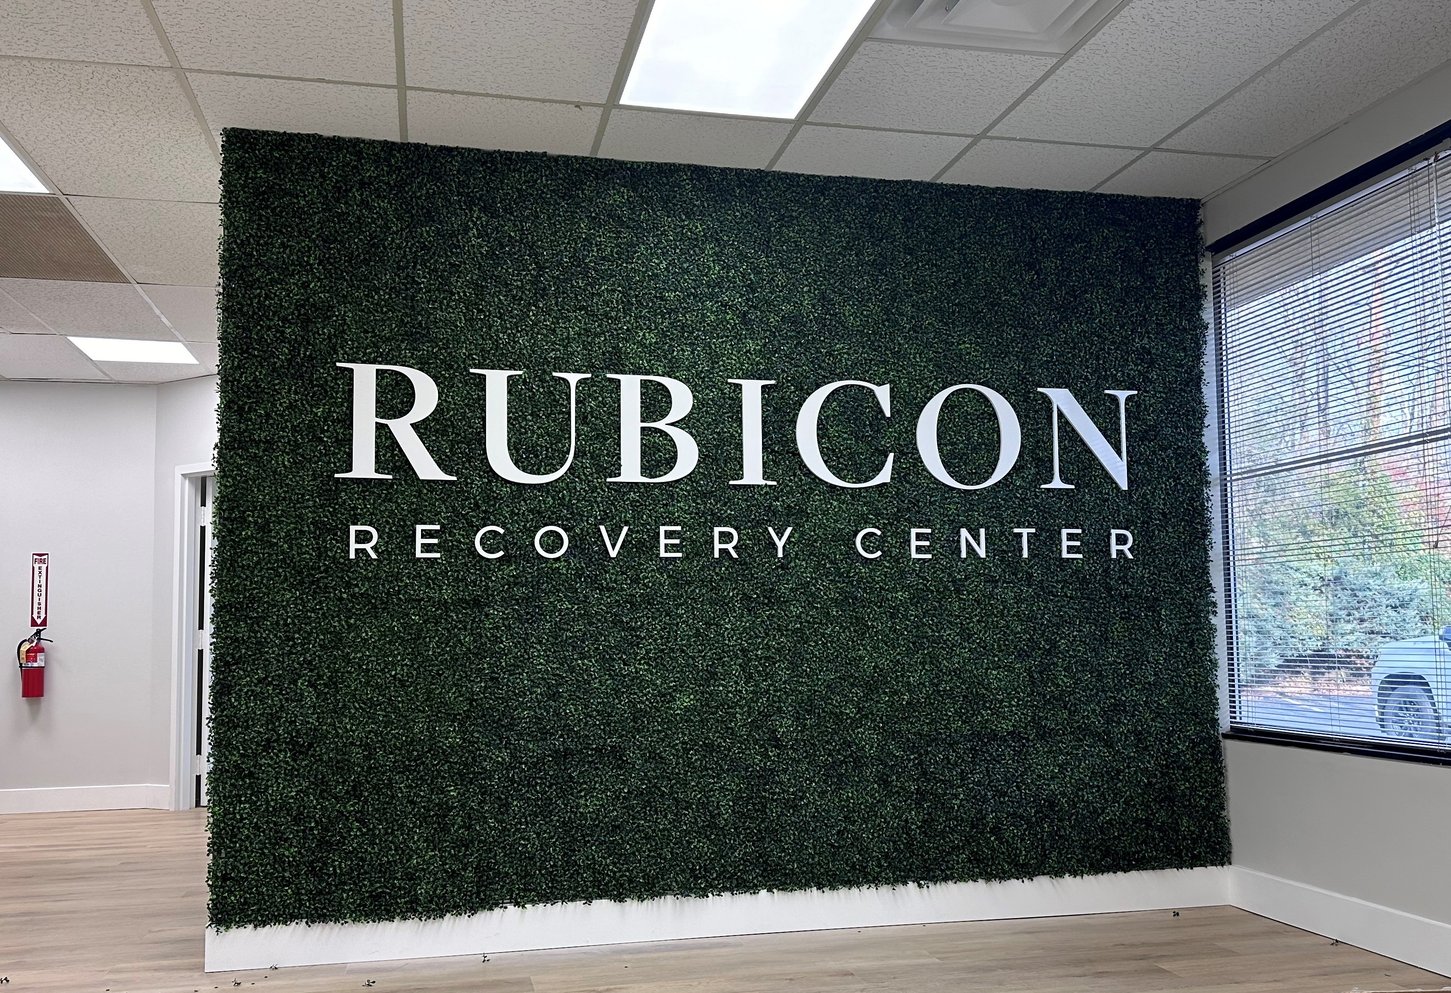 Laser Cut 3D Letters in Watchung, NJ Welcome Visitors to the Rubicon Recovery Center